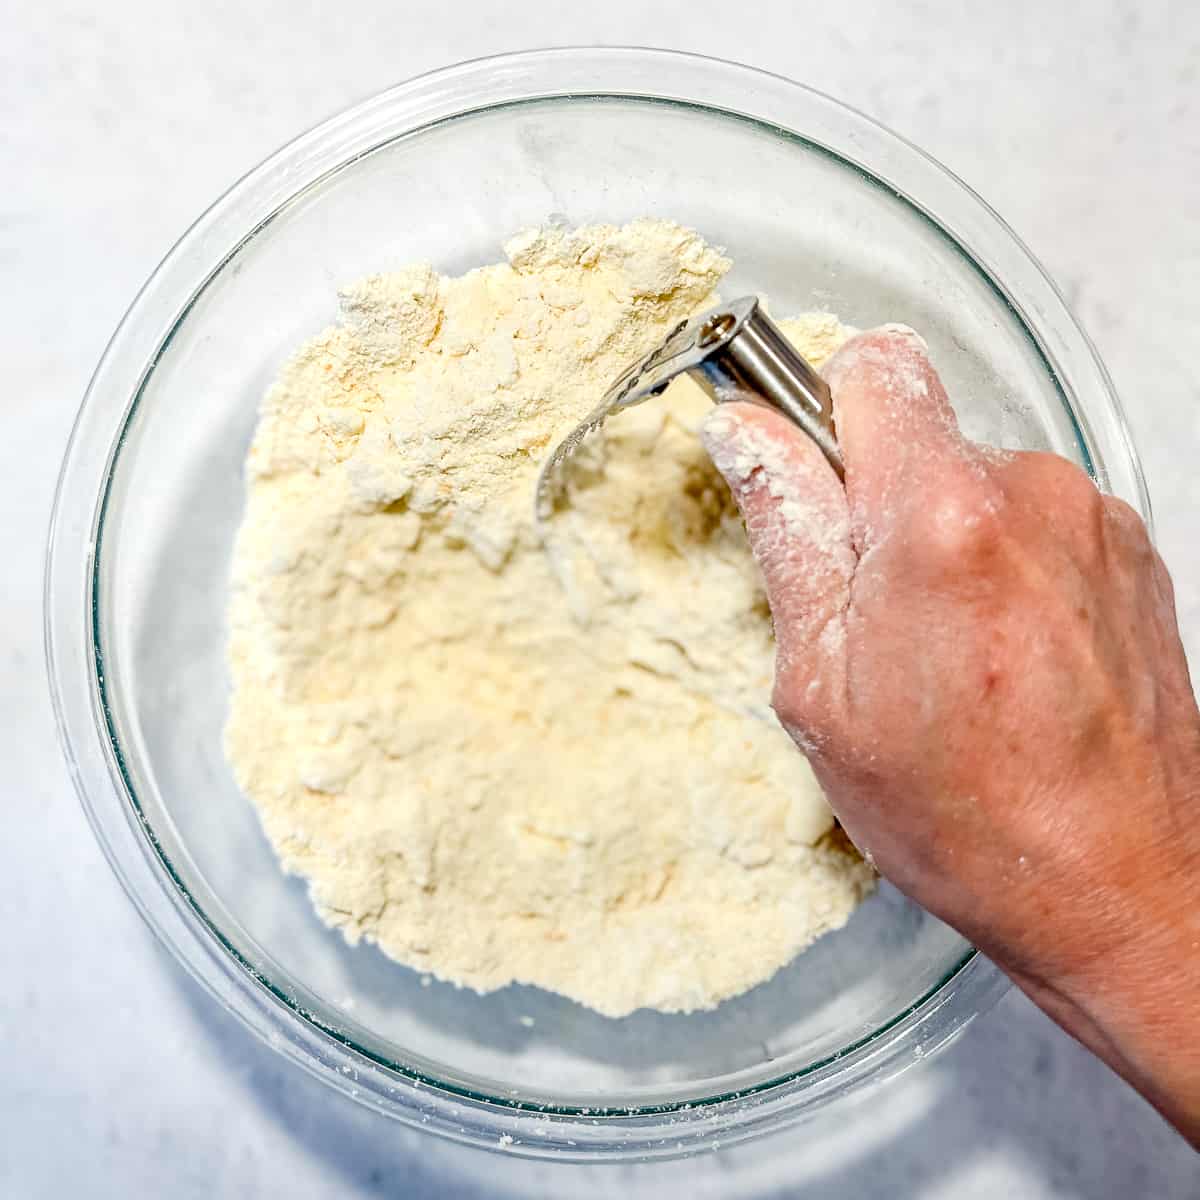 using pastry cutter to mix butter into dry ingredients.